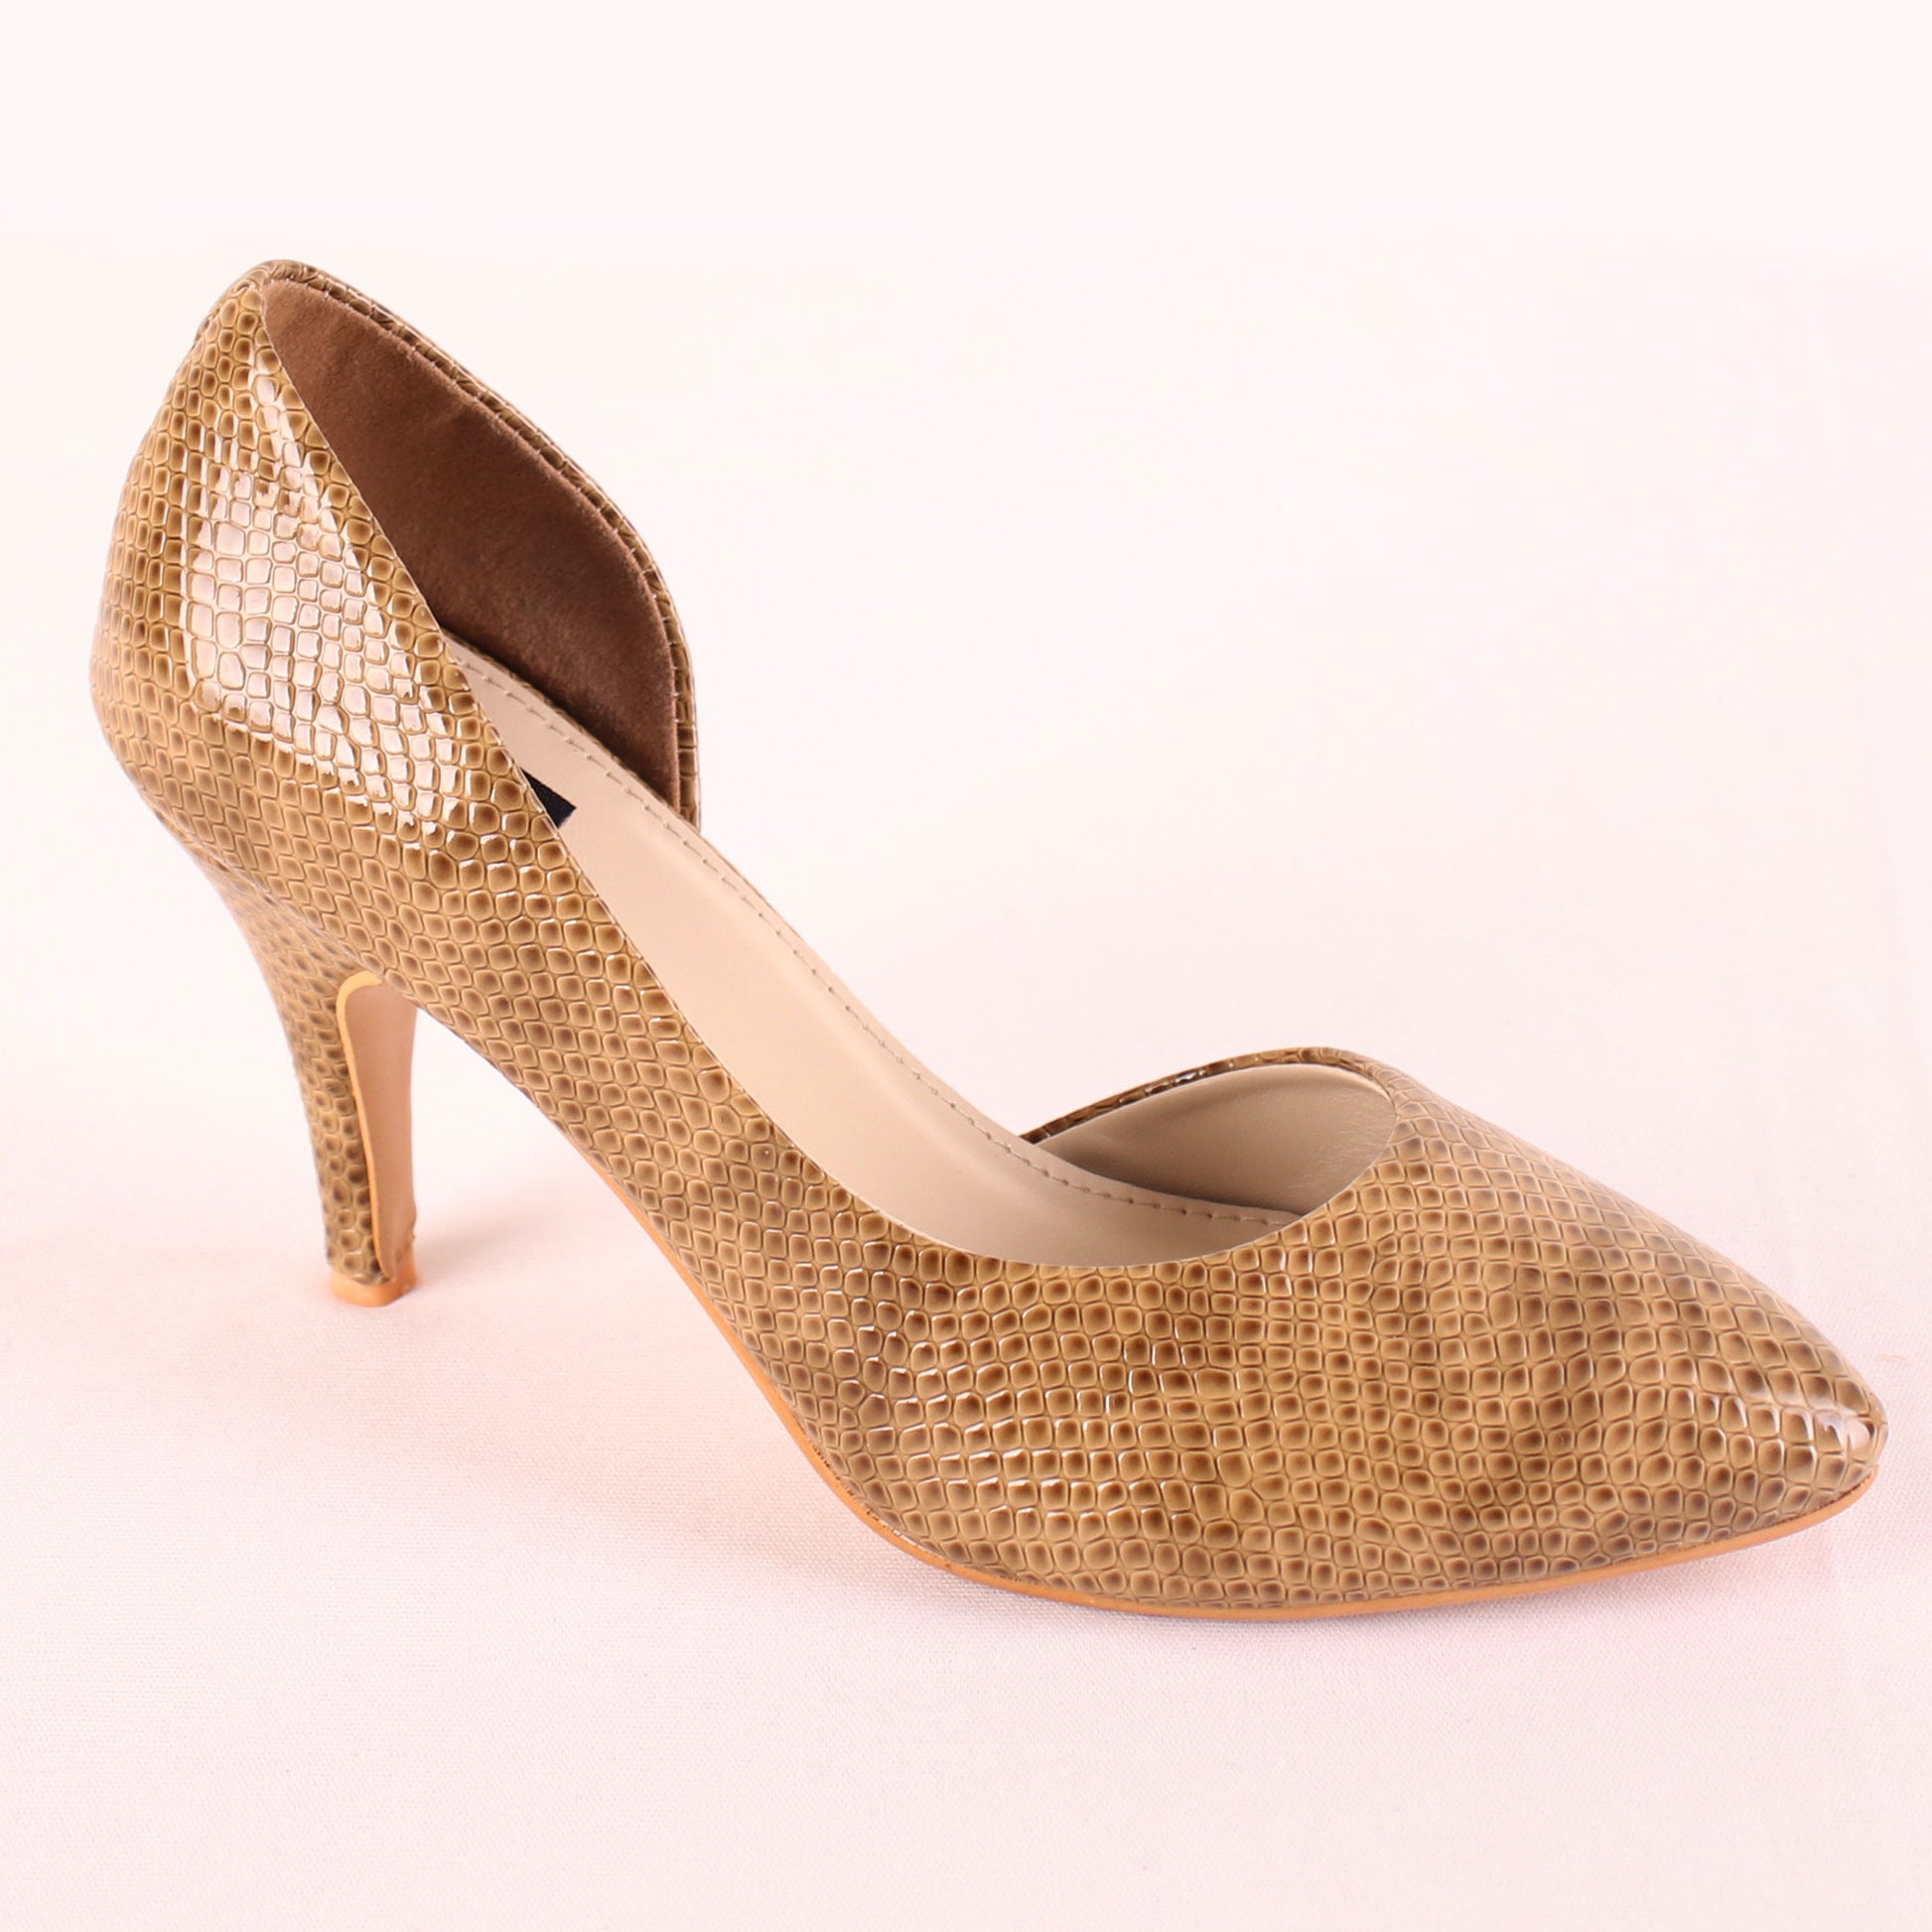 Foot Wear,The Awe-inspiring Snake Printed D'Orsay Pumps in Pale Green - Cippele Multi Store